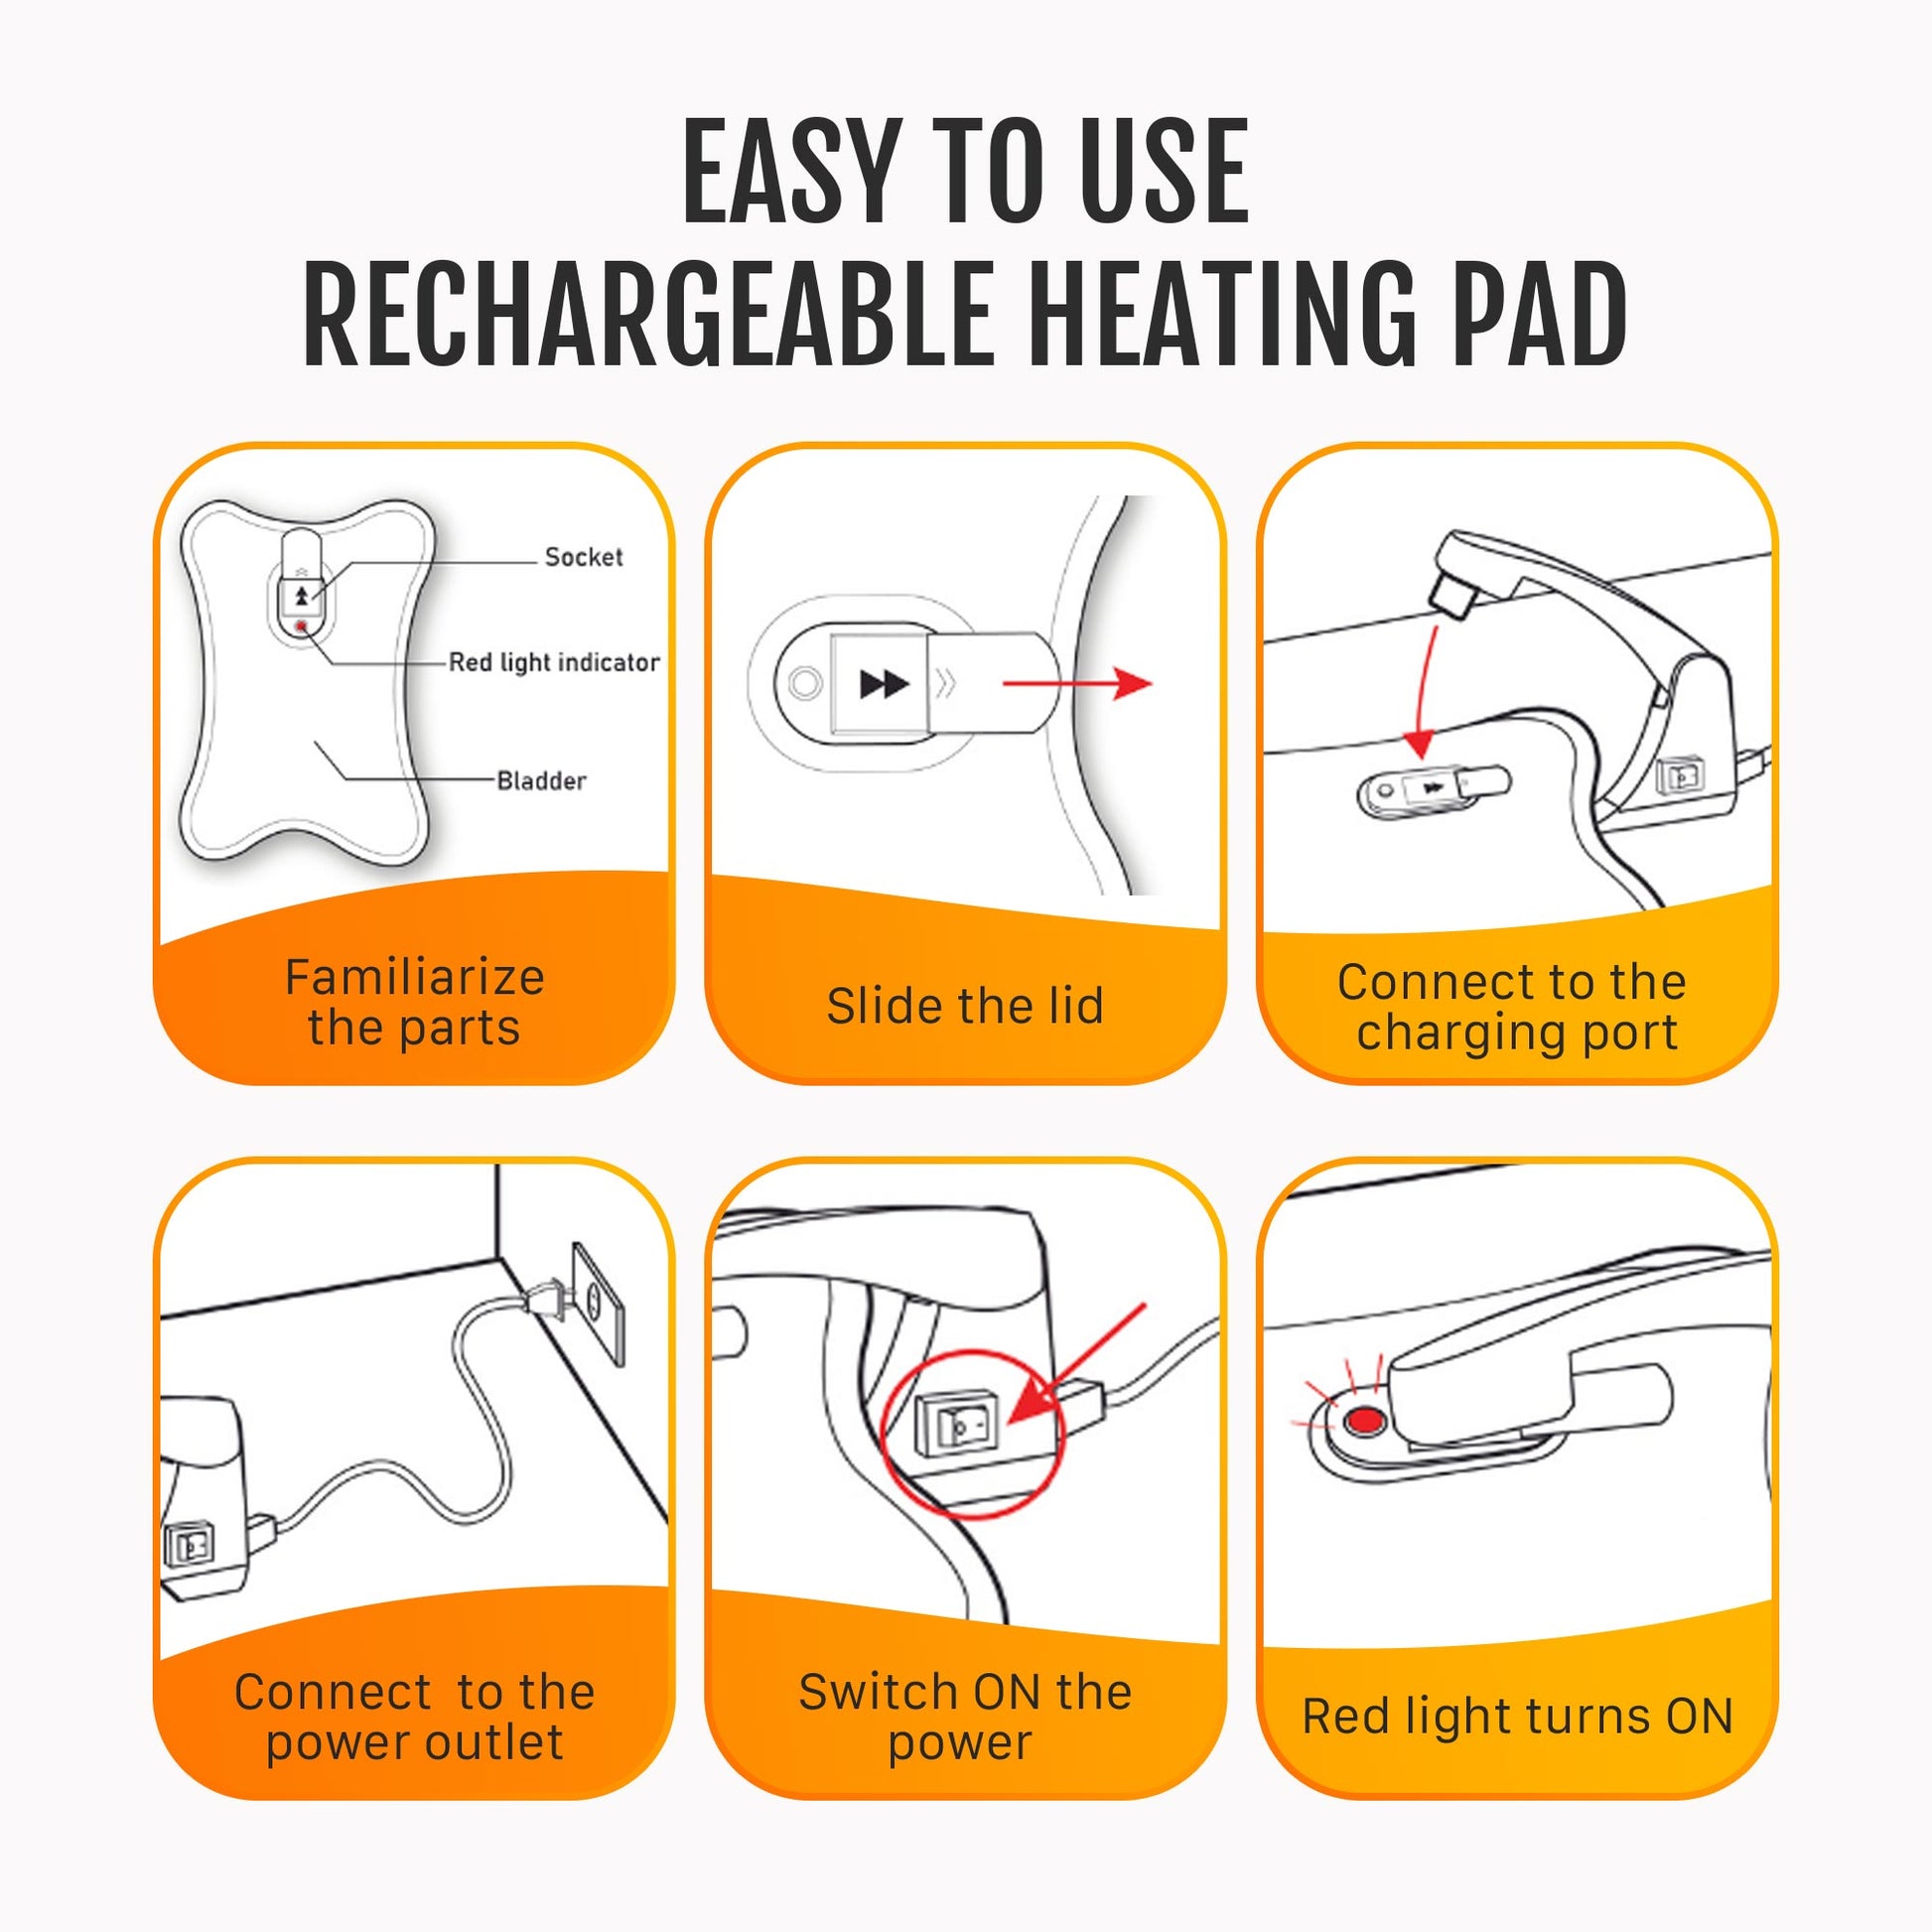 Electric Heated Foot Warmer Pad, Usb-powered, Suitable For Office And Home  Use